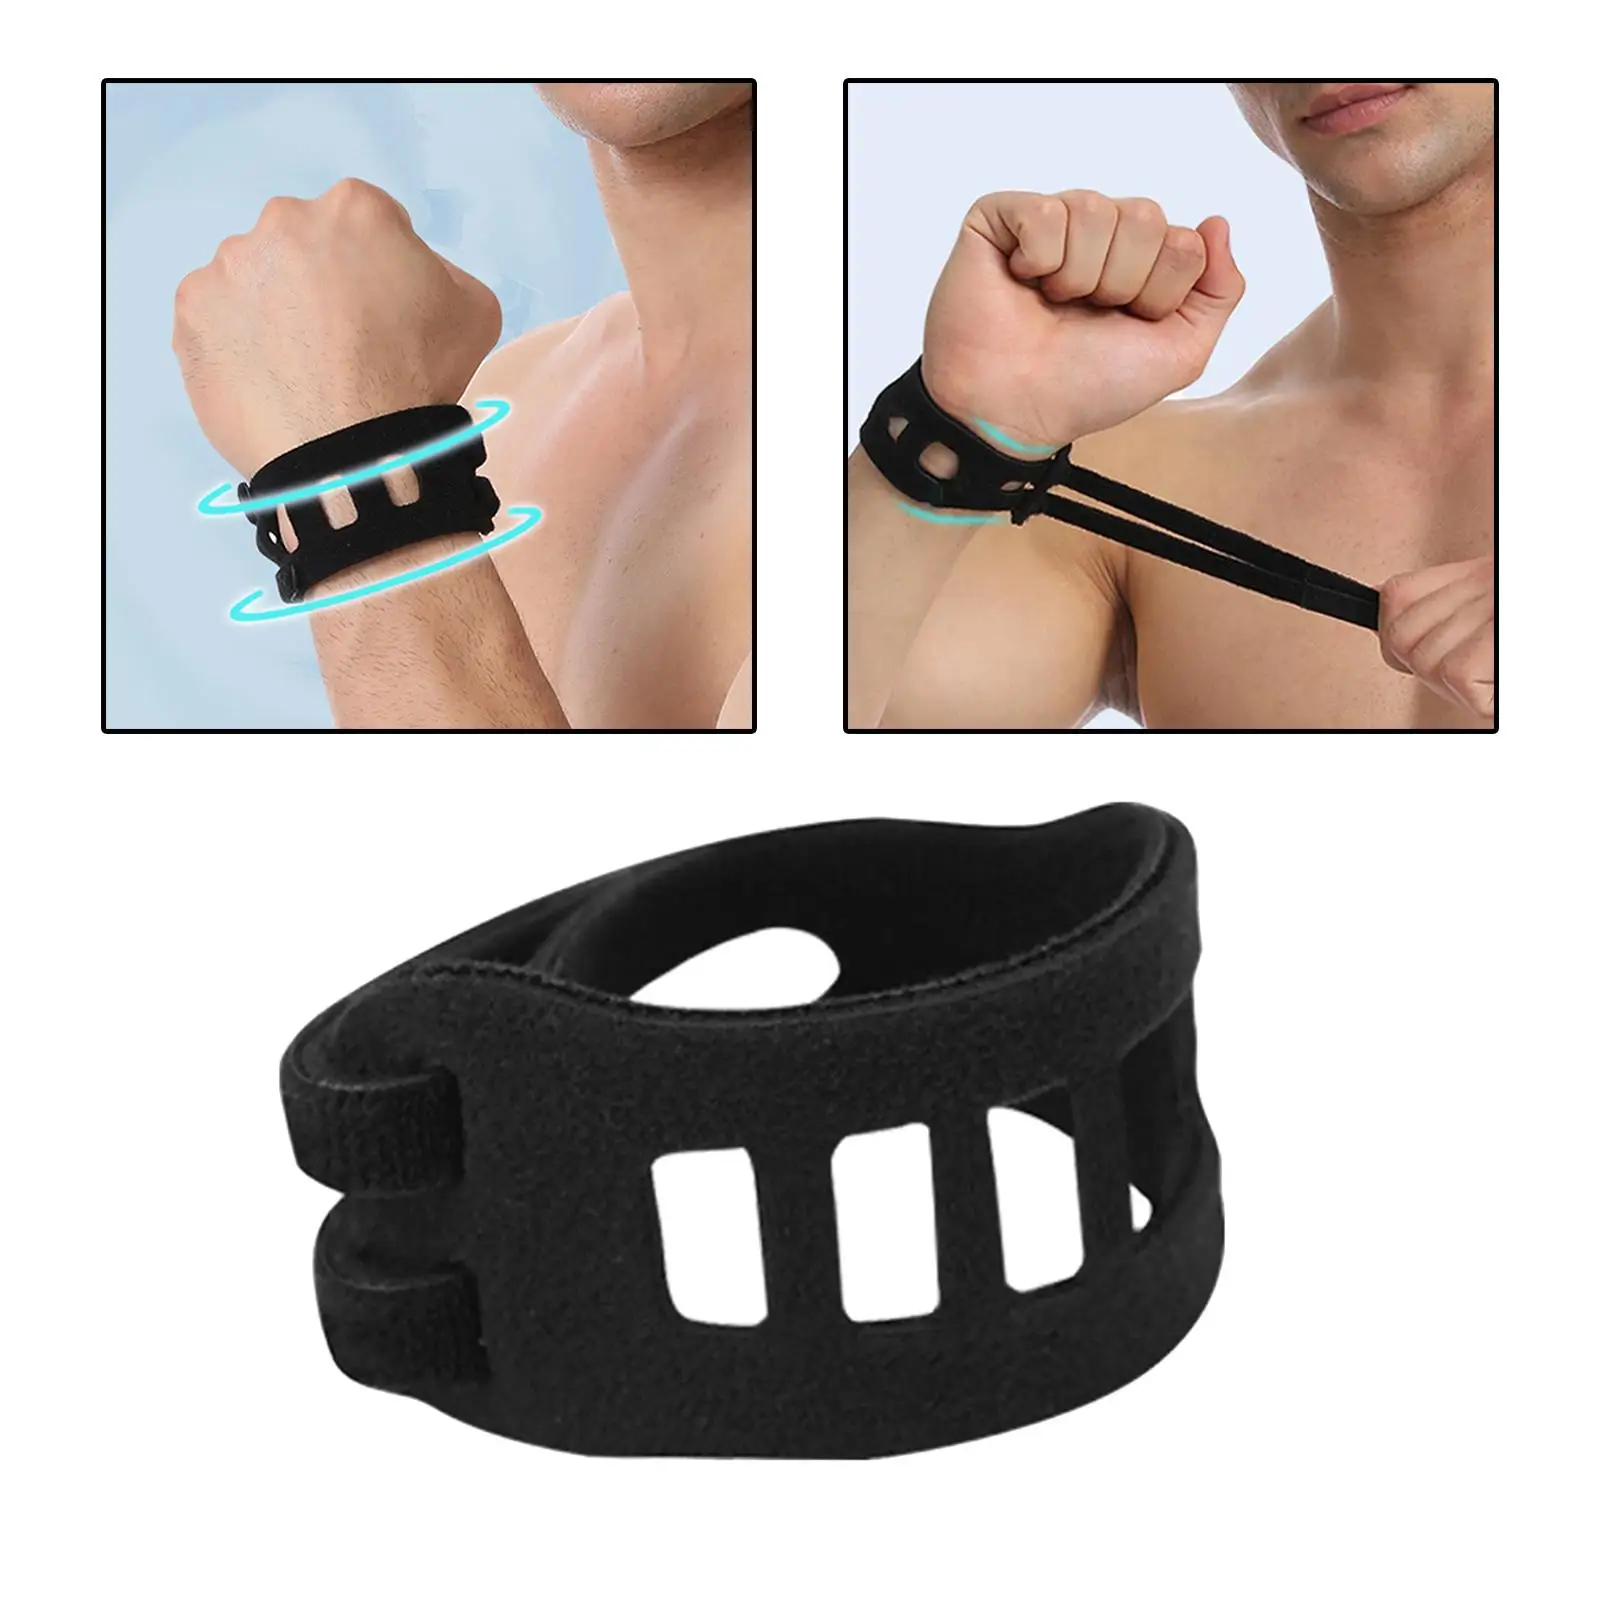 Tfcc Wrist Brace Breathable Straps for Fitness Weight Bearing Working Out Sports